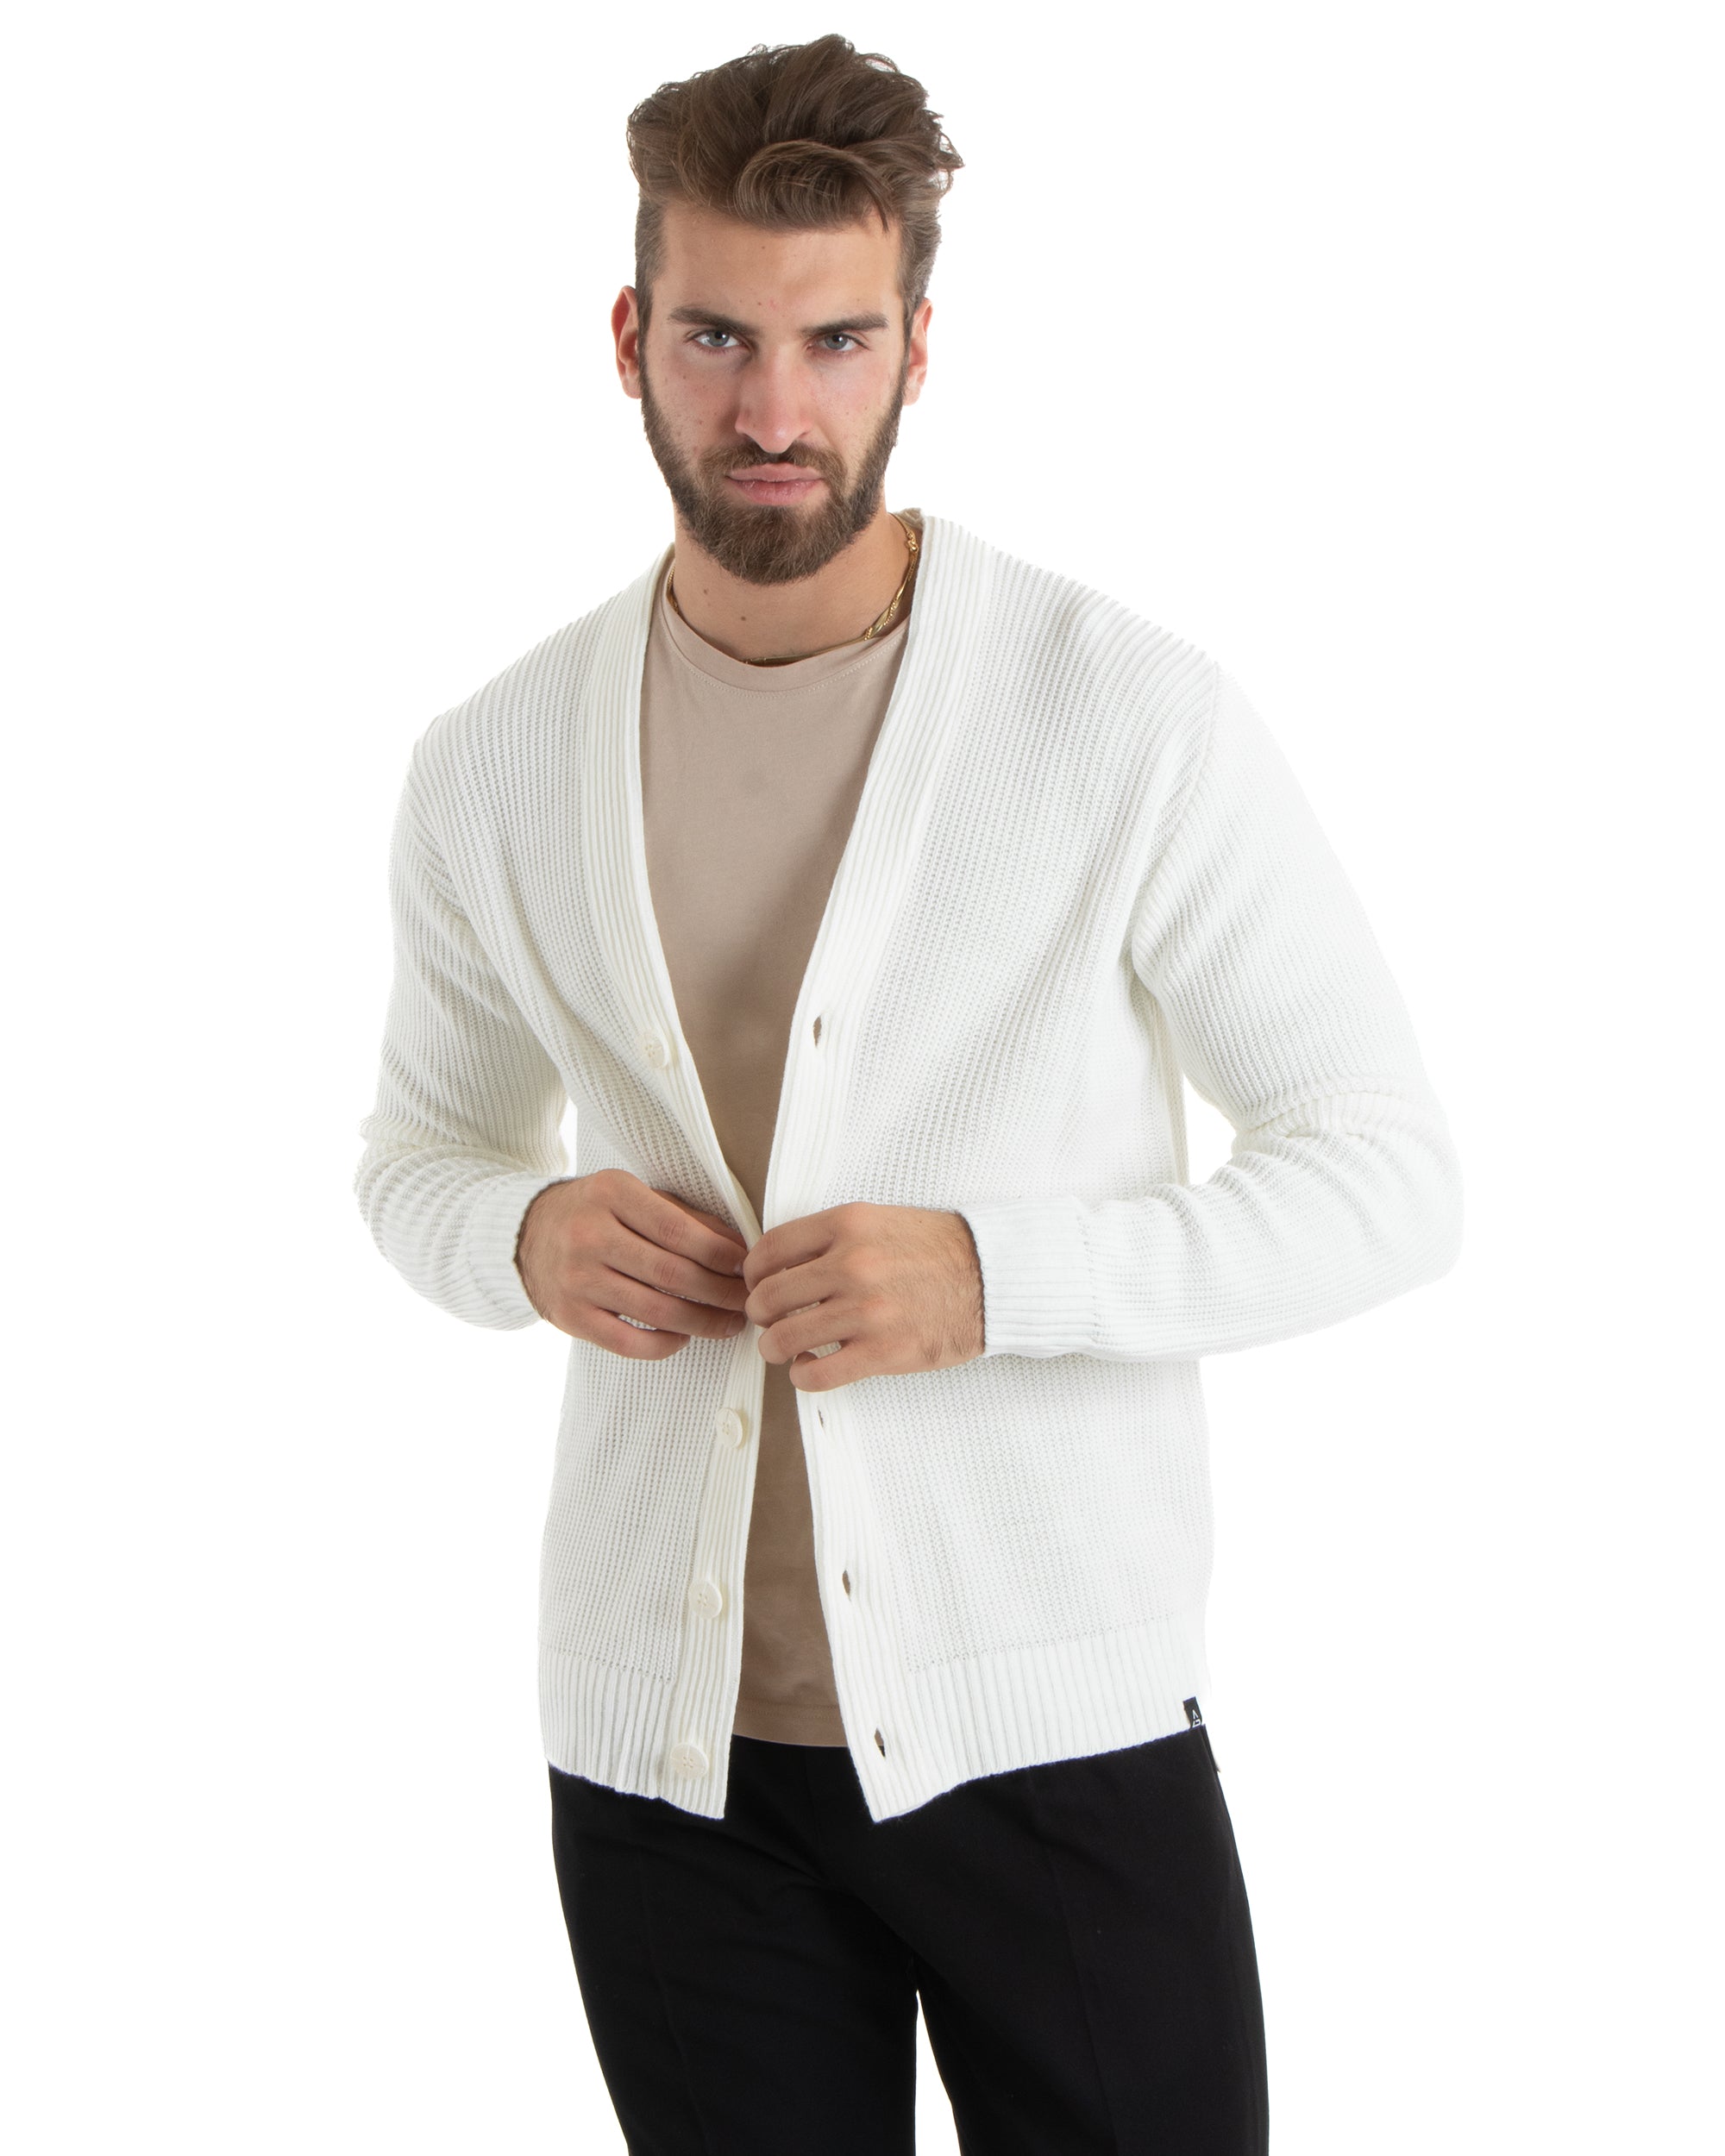 Men's Cardigan Jacket With Buttons V-Neck Sweater English Knit Cream GIOSAL-M2676A